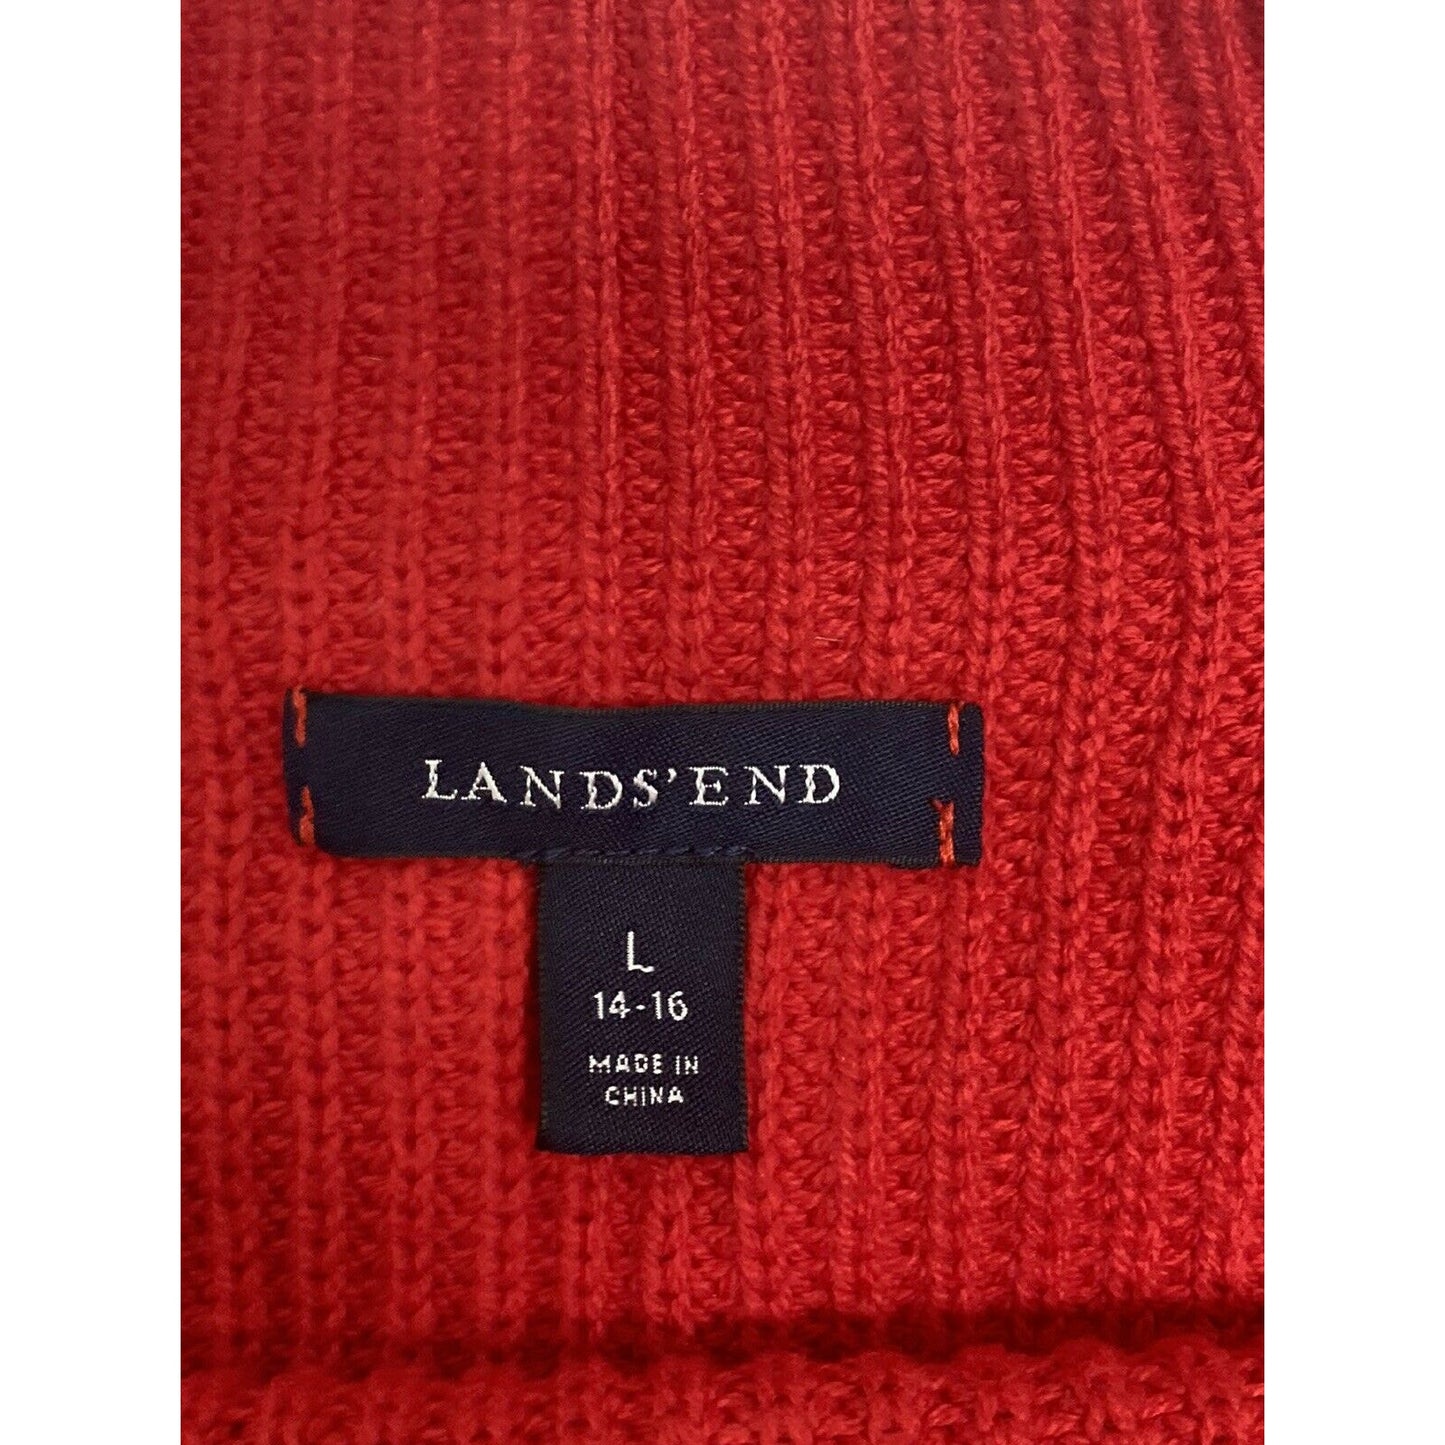 Lands End Womans Pink Red Striped Pullover Sweater Size XL 14-16